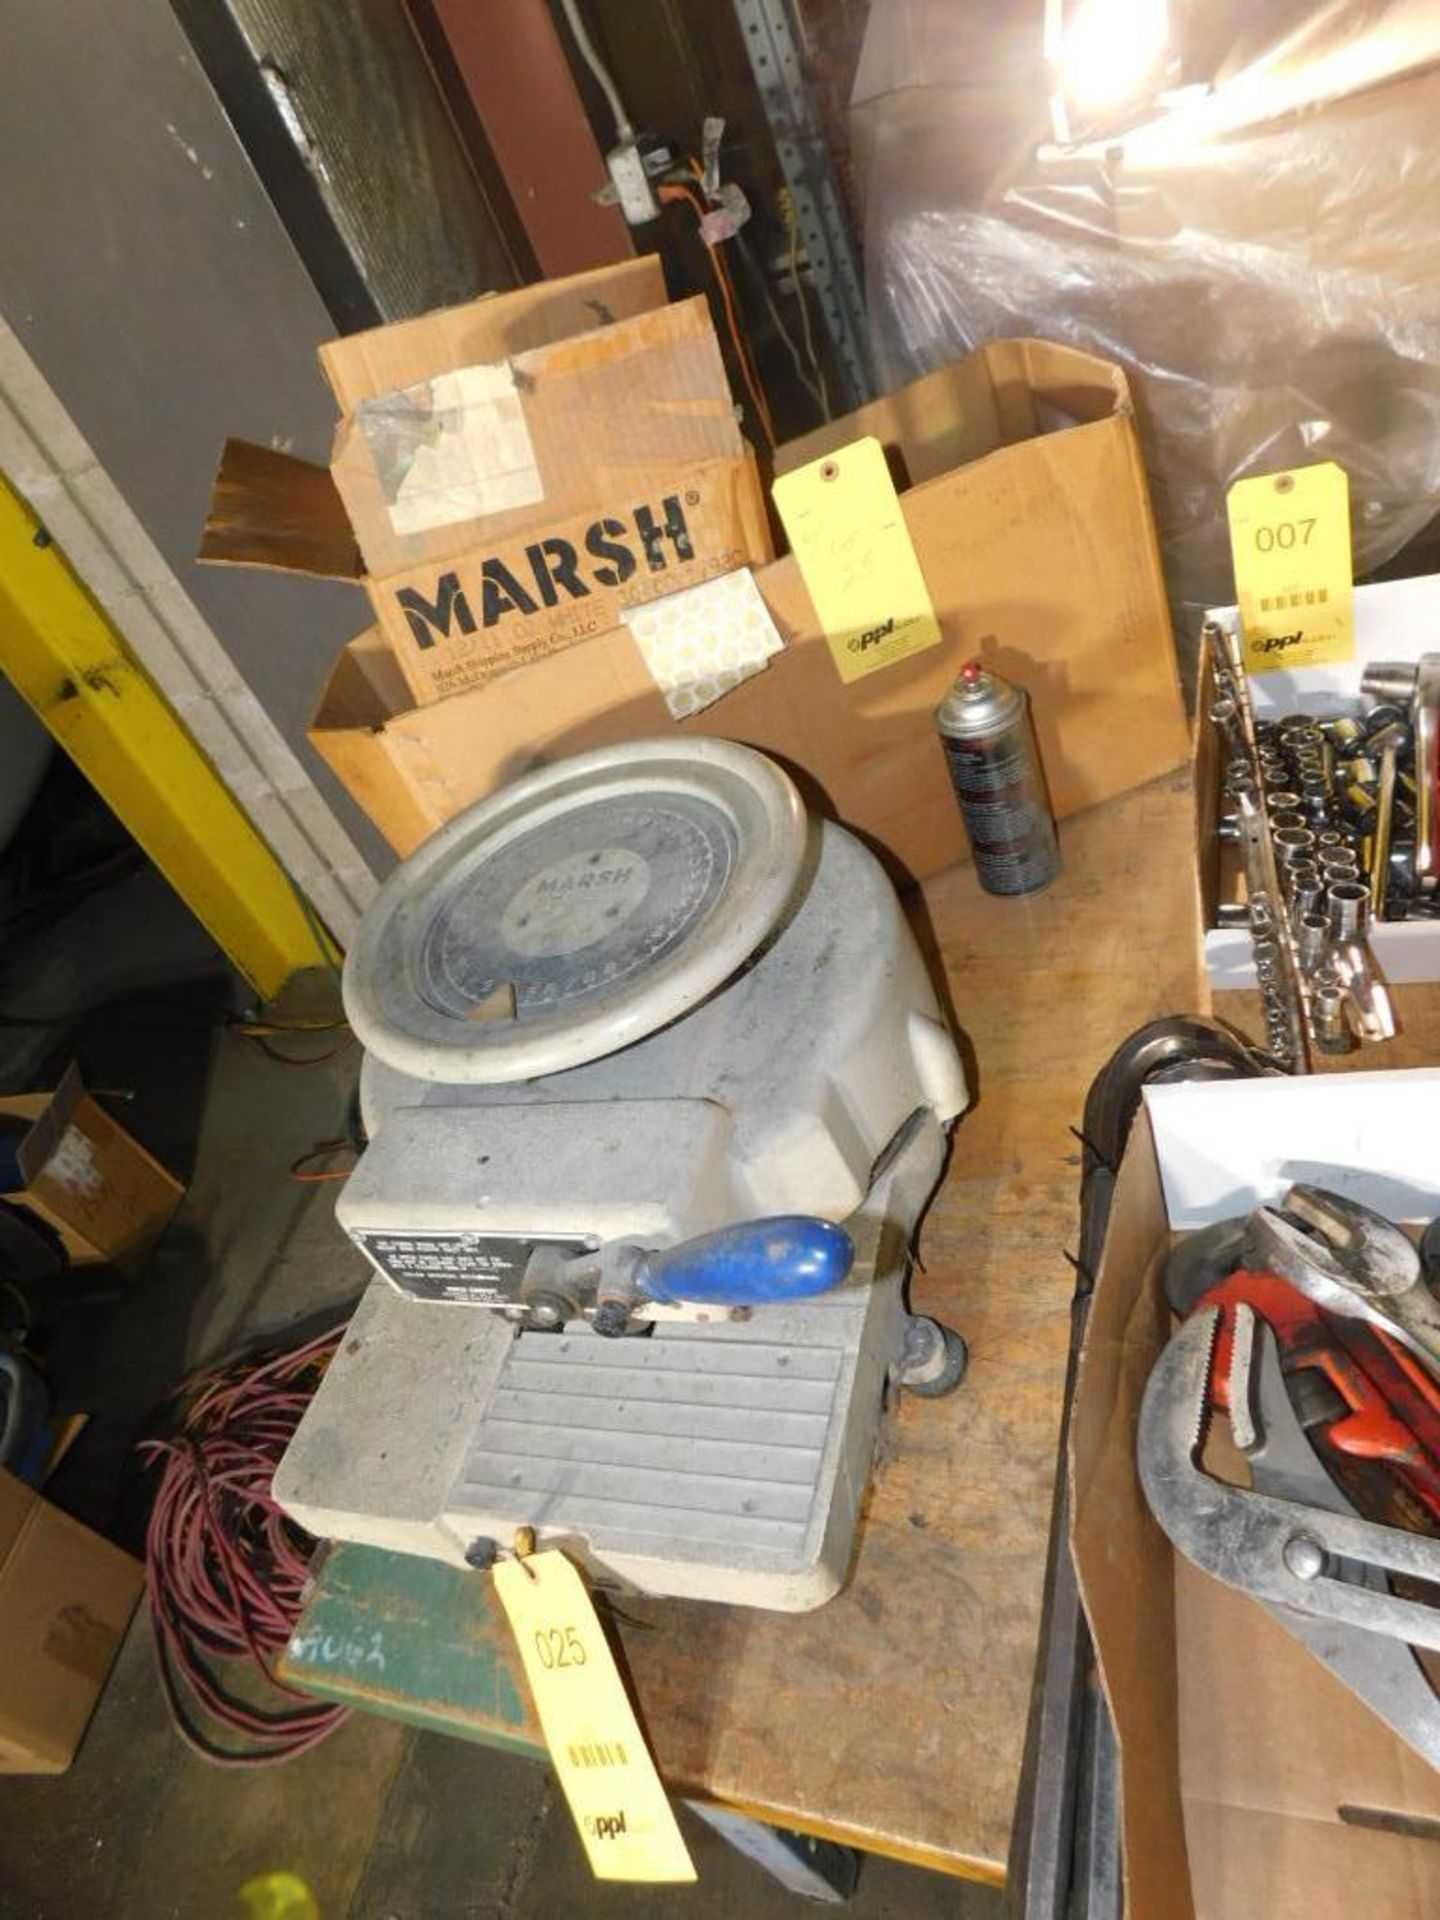 LOT: Marsh 1/2 in. Model H 38570 Stencil Machine, with (13) Cans of White Spray Stencil Ink, Stencil